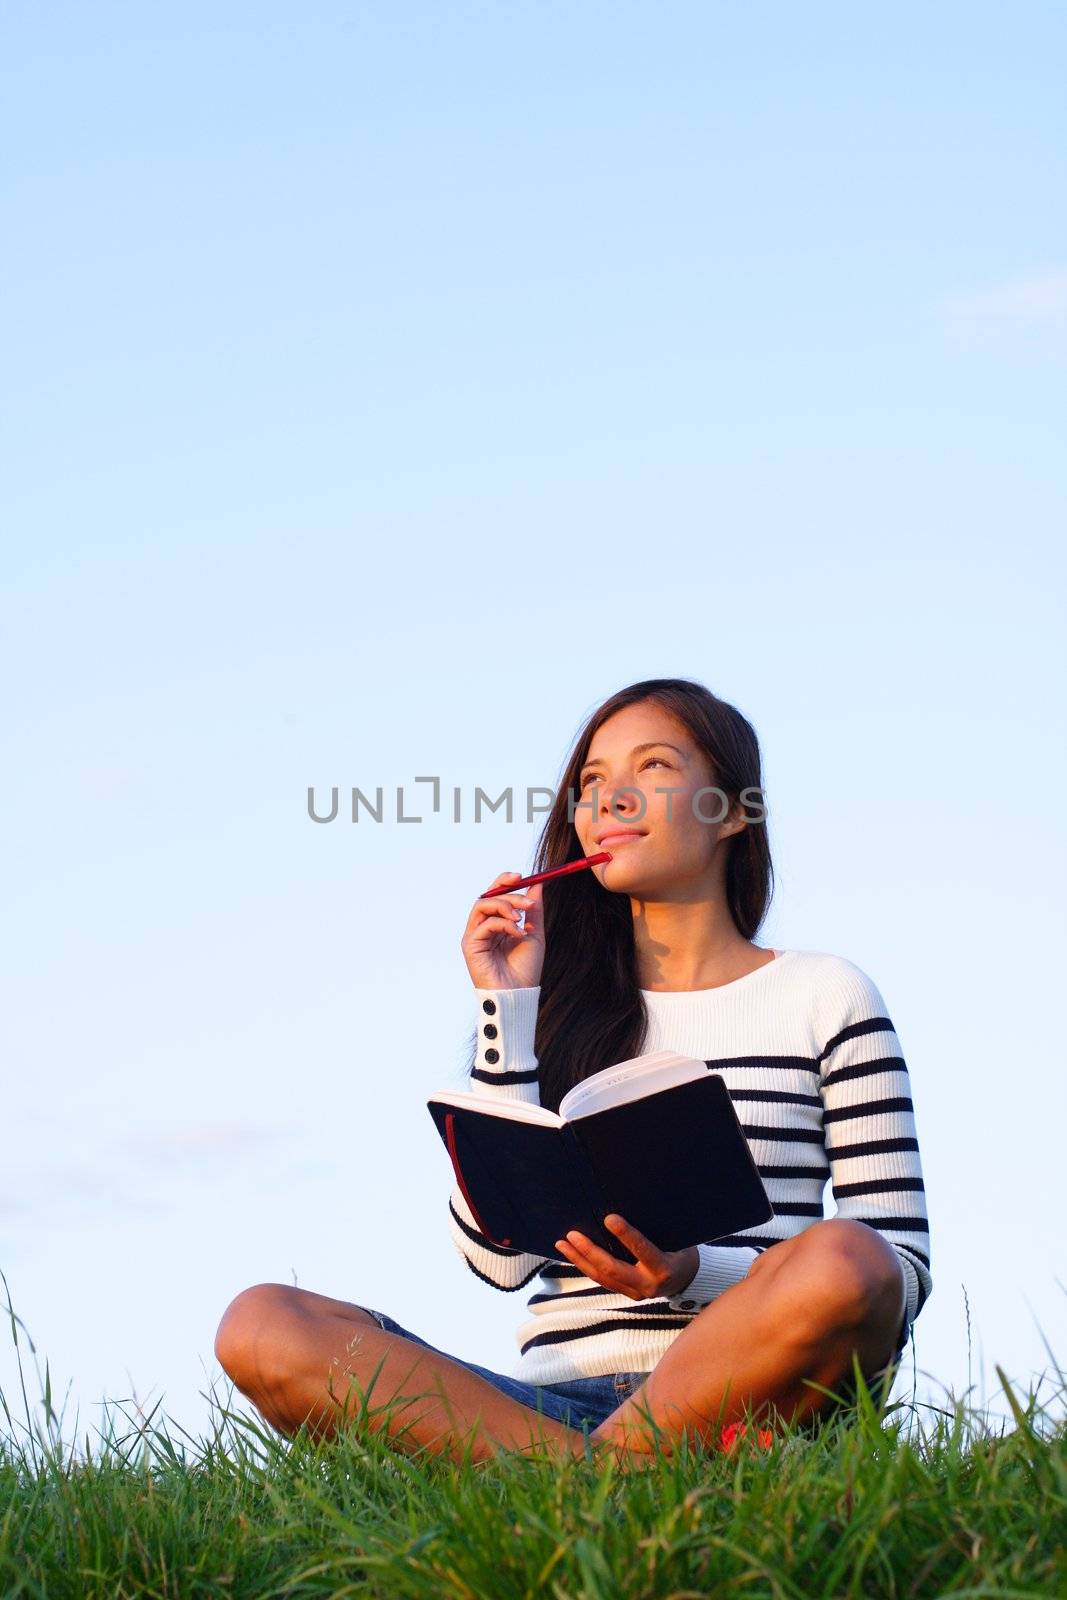 Woman thinking hard studying outside in evening light with a lot of copy space. Beautiful mixed asian / caucasian woman.